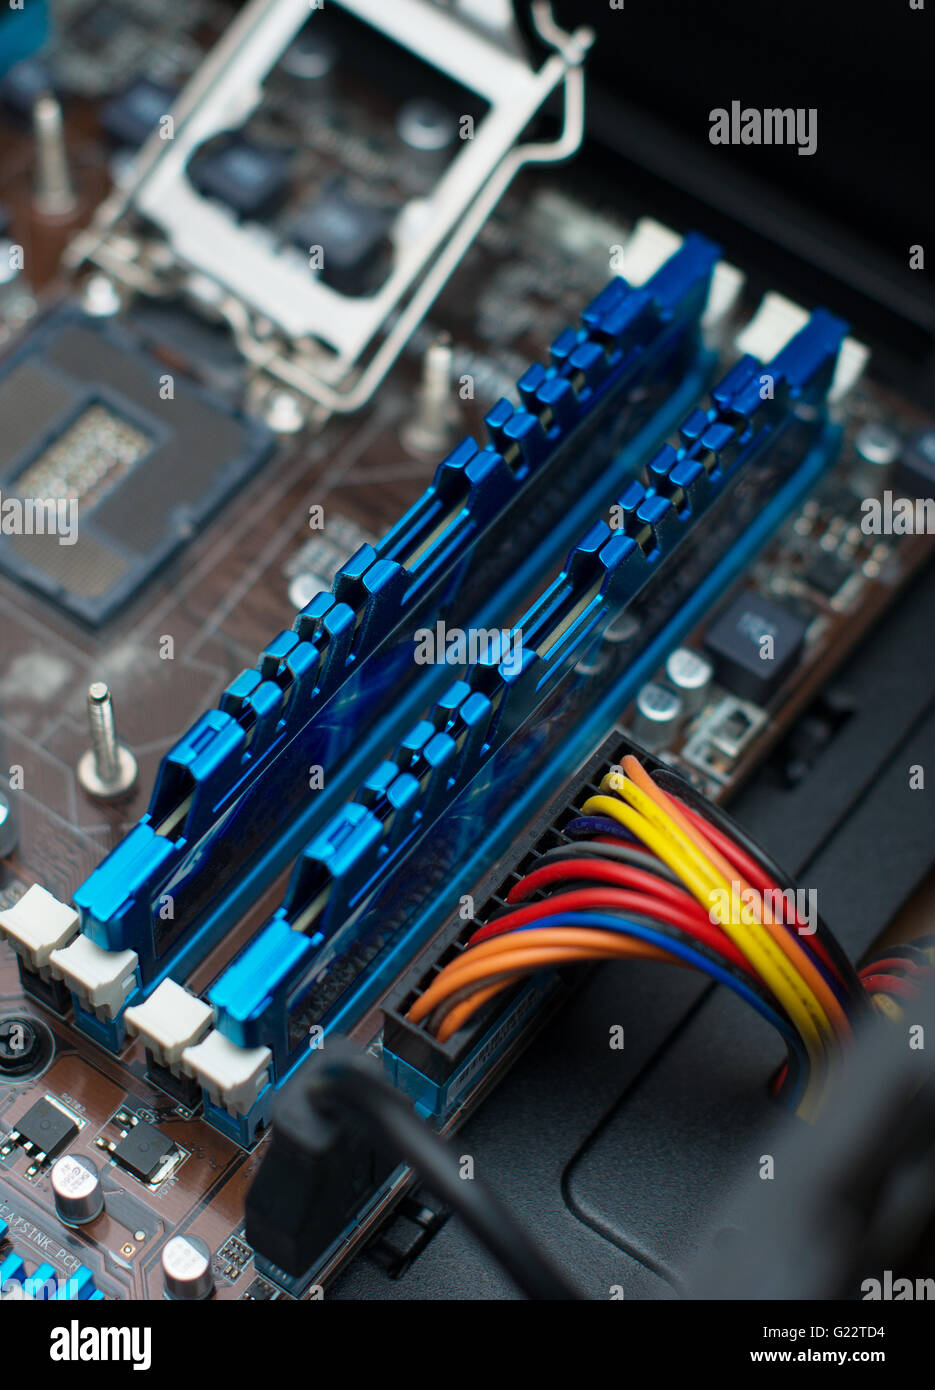 Inside of pc. Motherboard, CPU socket and RAM memory. Stock Photo